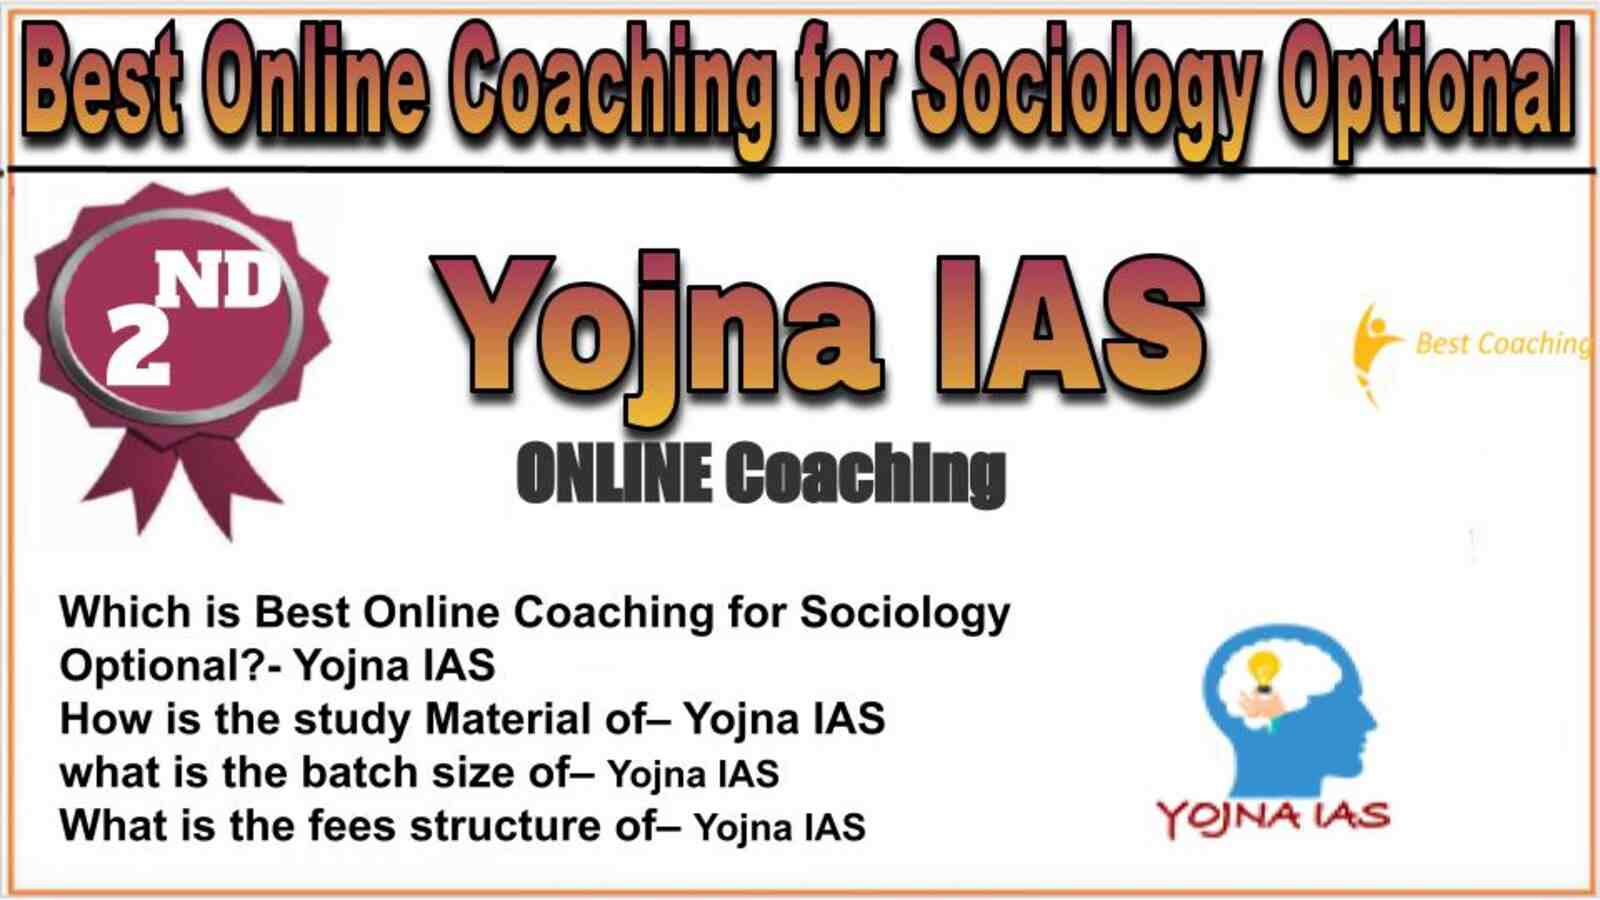 Rank 2 best Online coaching for Sociology Optional